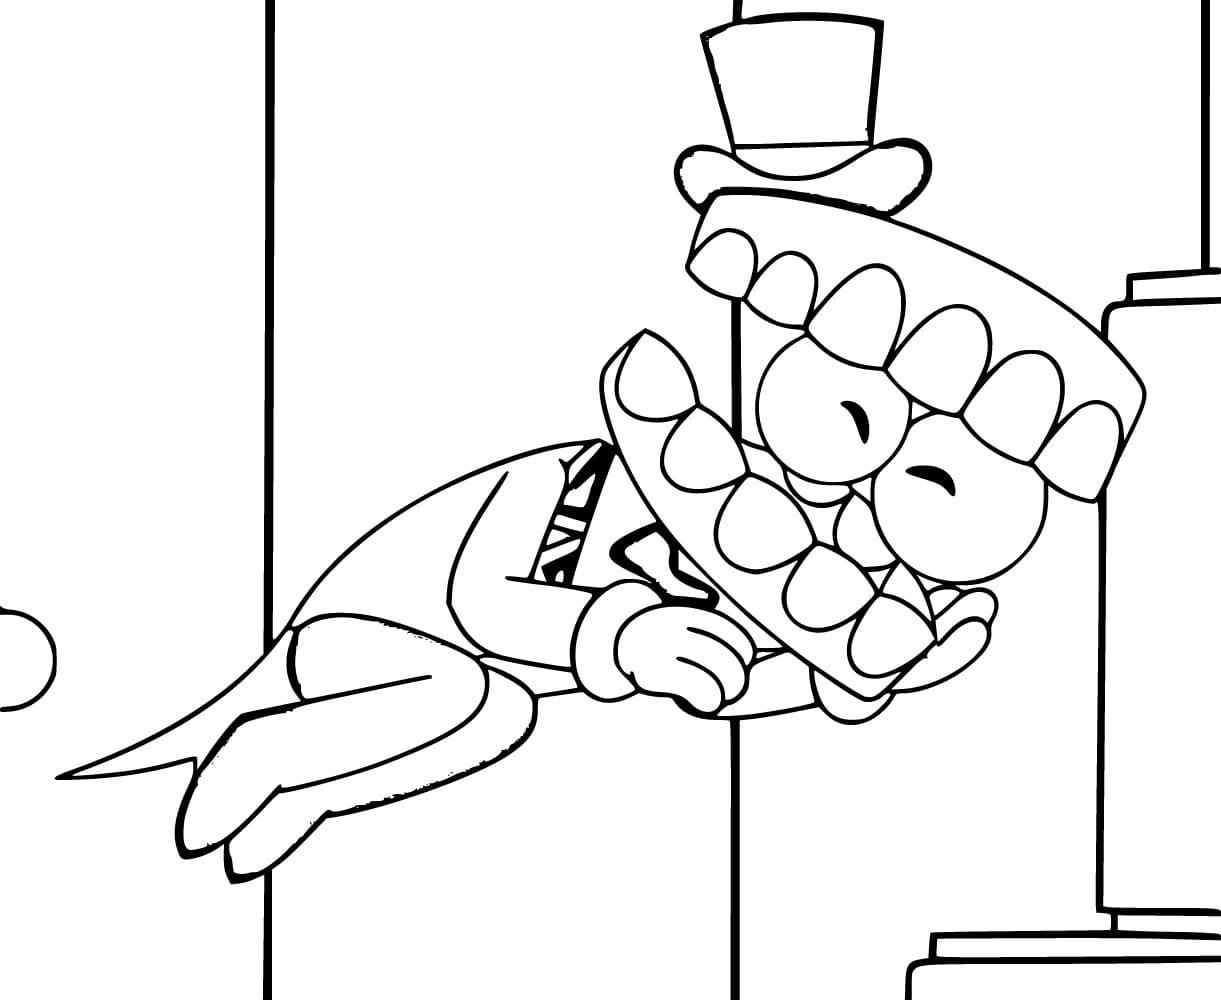 The Amazing Digital Circus coloring pages - ColoringLib